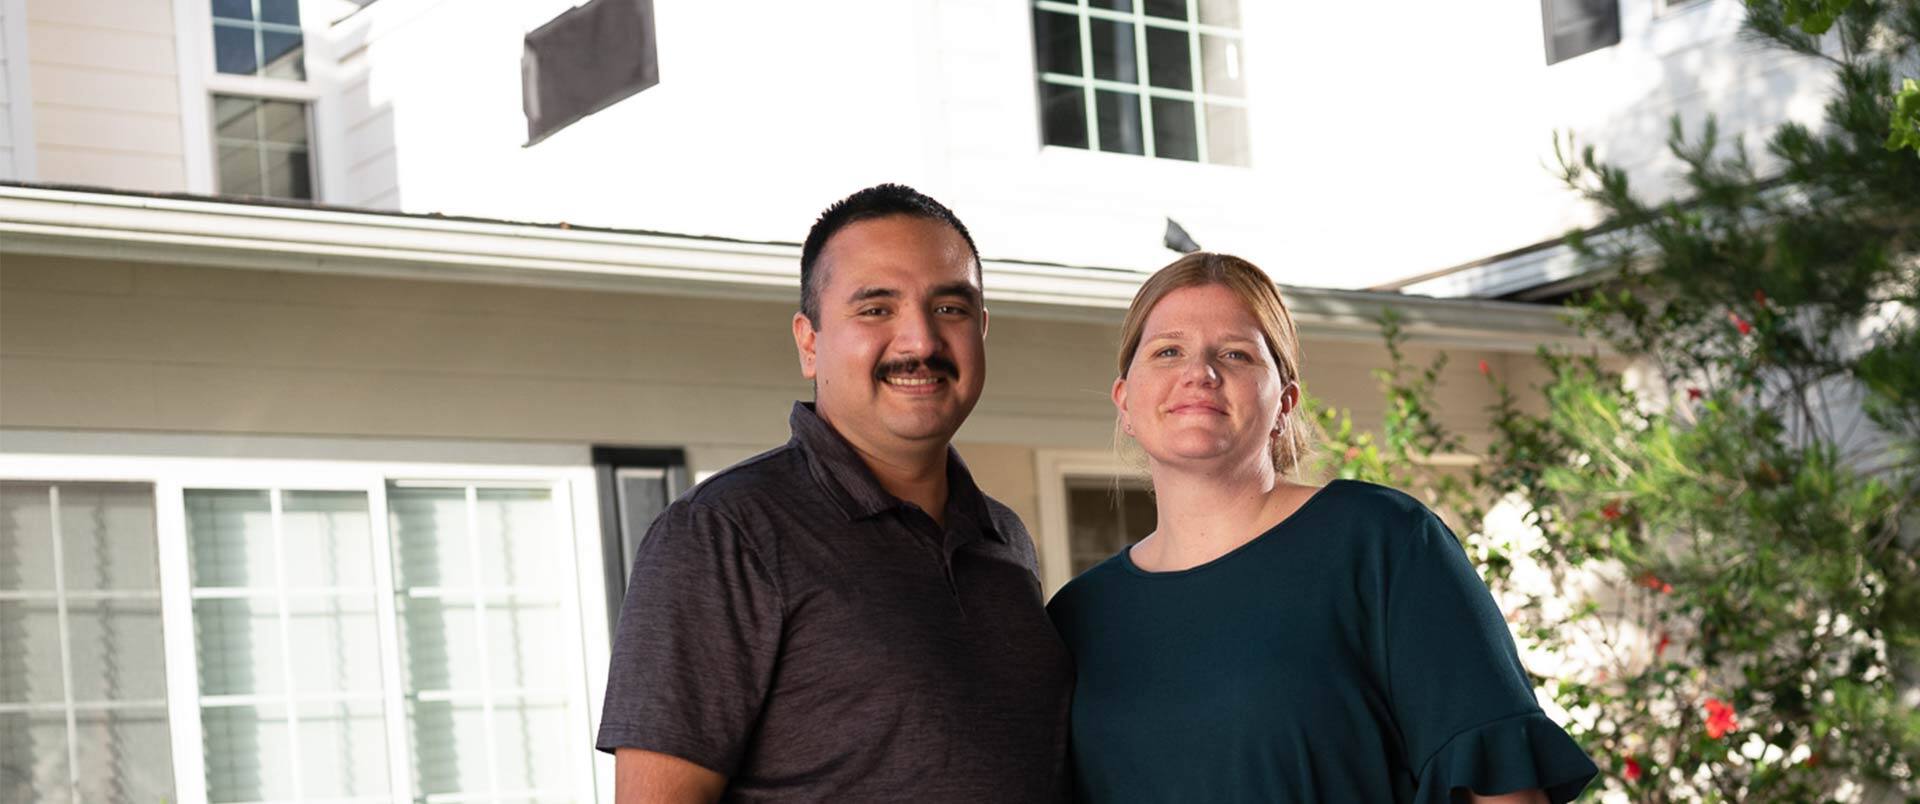 Shelly and Salvador Villa, two SNHU graduates, standing outside their home and smiling